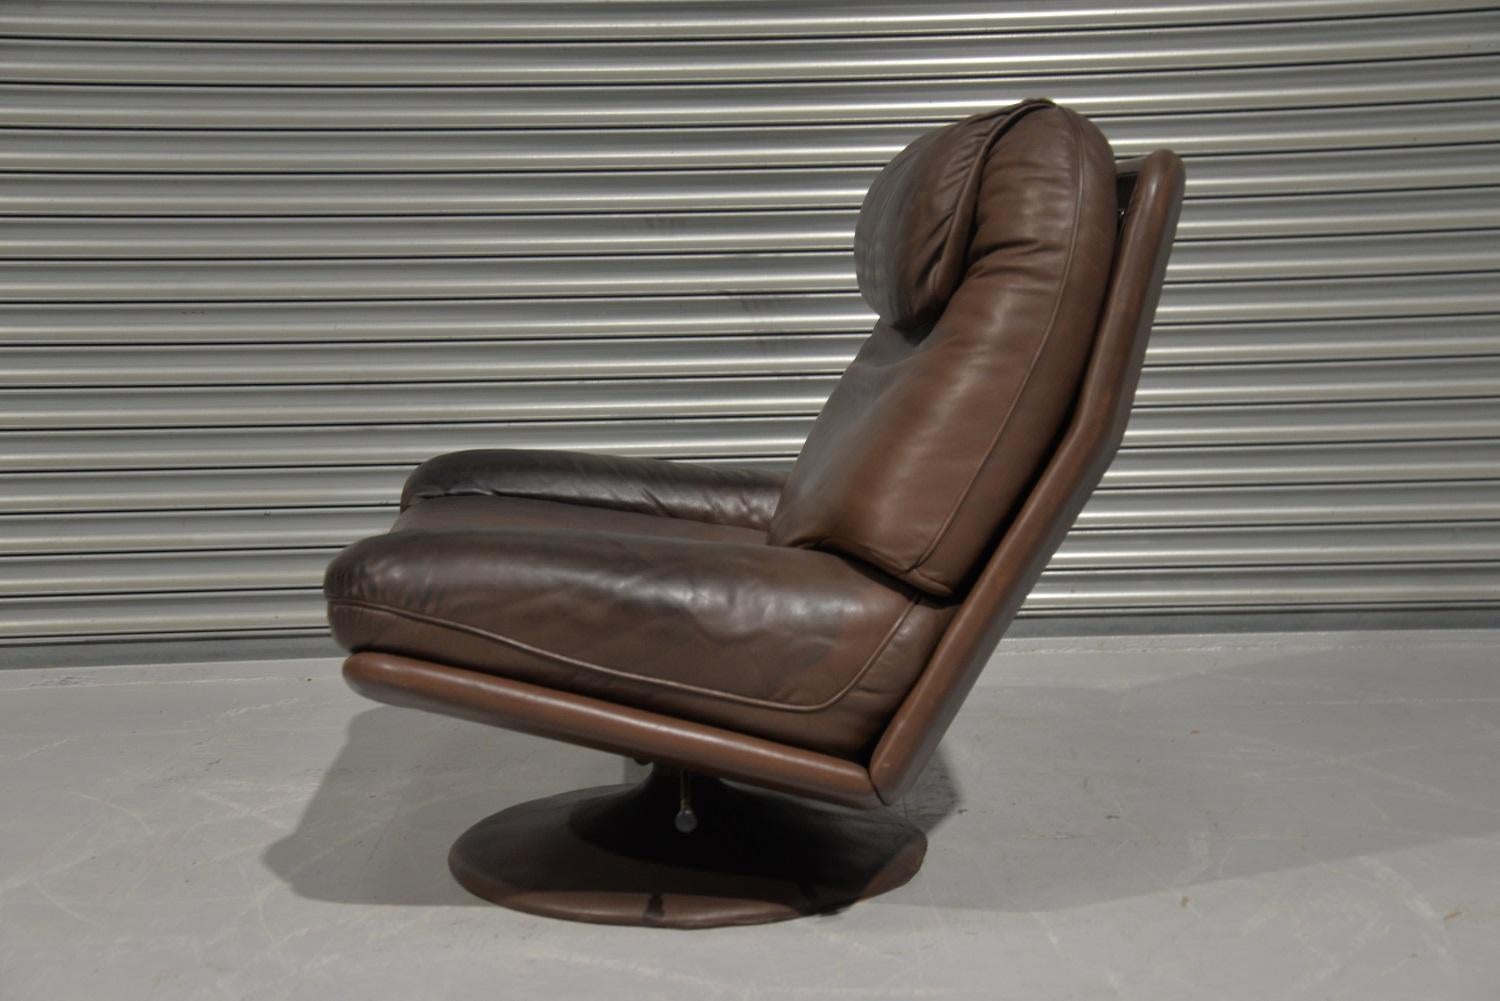 Vintage De Sede Leather Swivel Armchair and Ottoman, Switzerland, 1980s For Sale 1